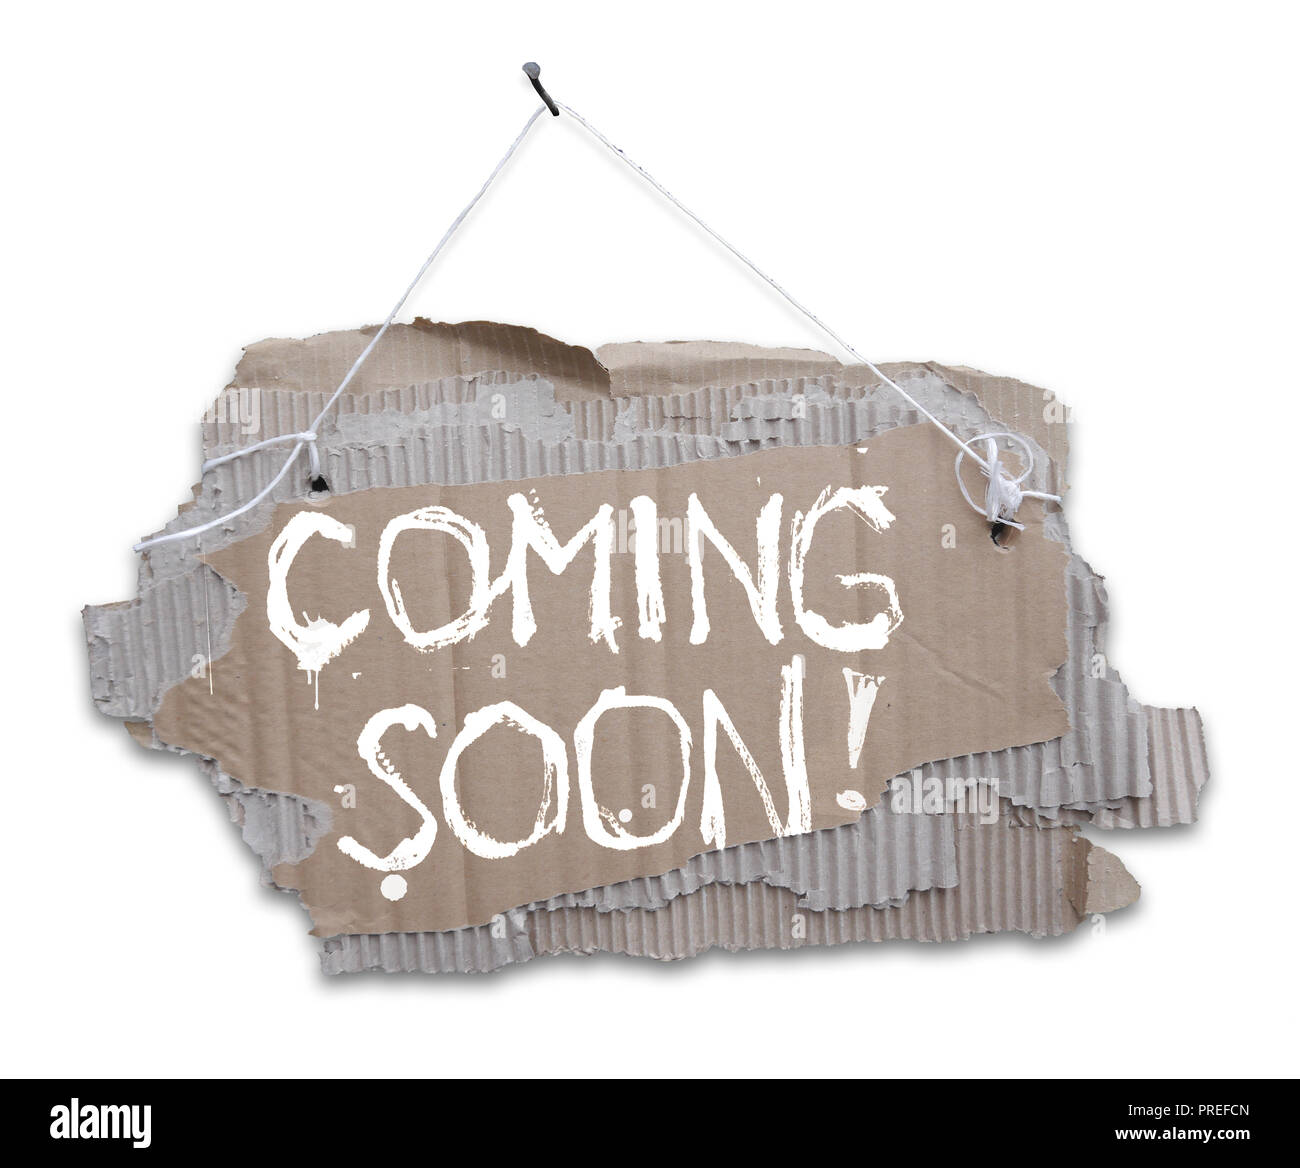 Cardboard sign with message COMING SOON. Ripped corrugated paper on a rope and with handwritten inscription COMING SOON. Isolated on white background. Stock Photo